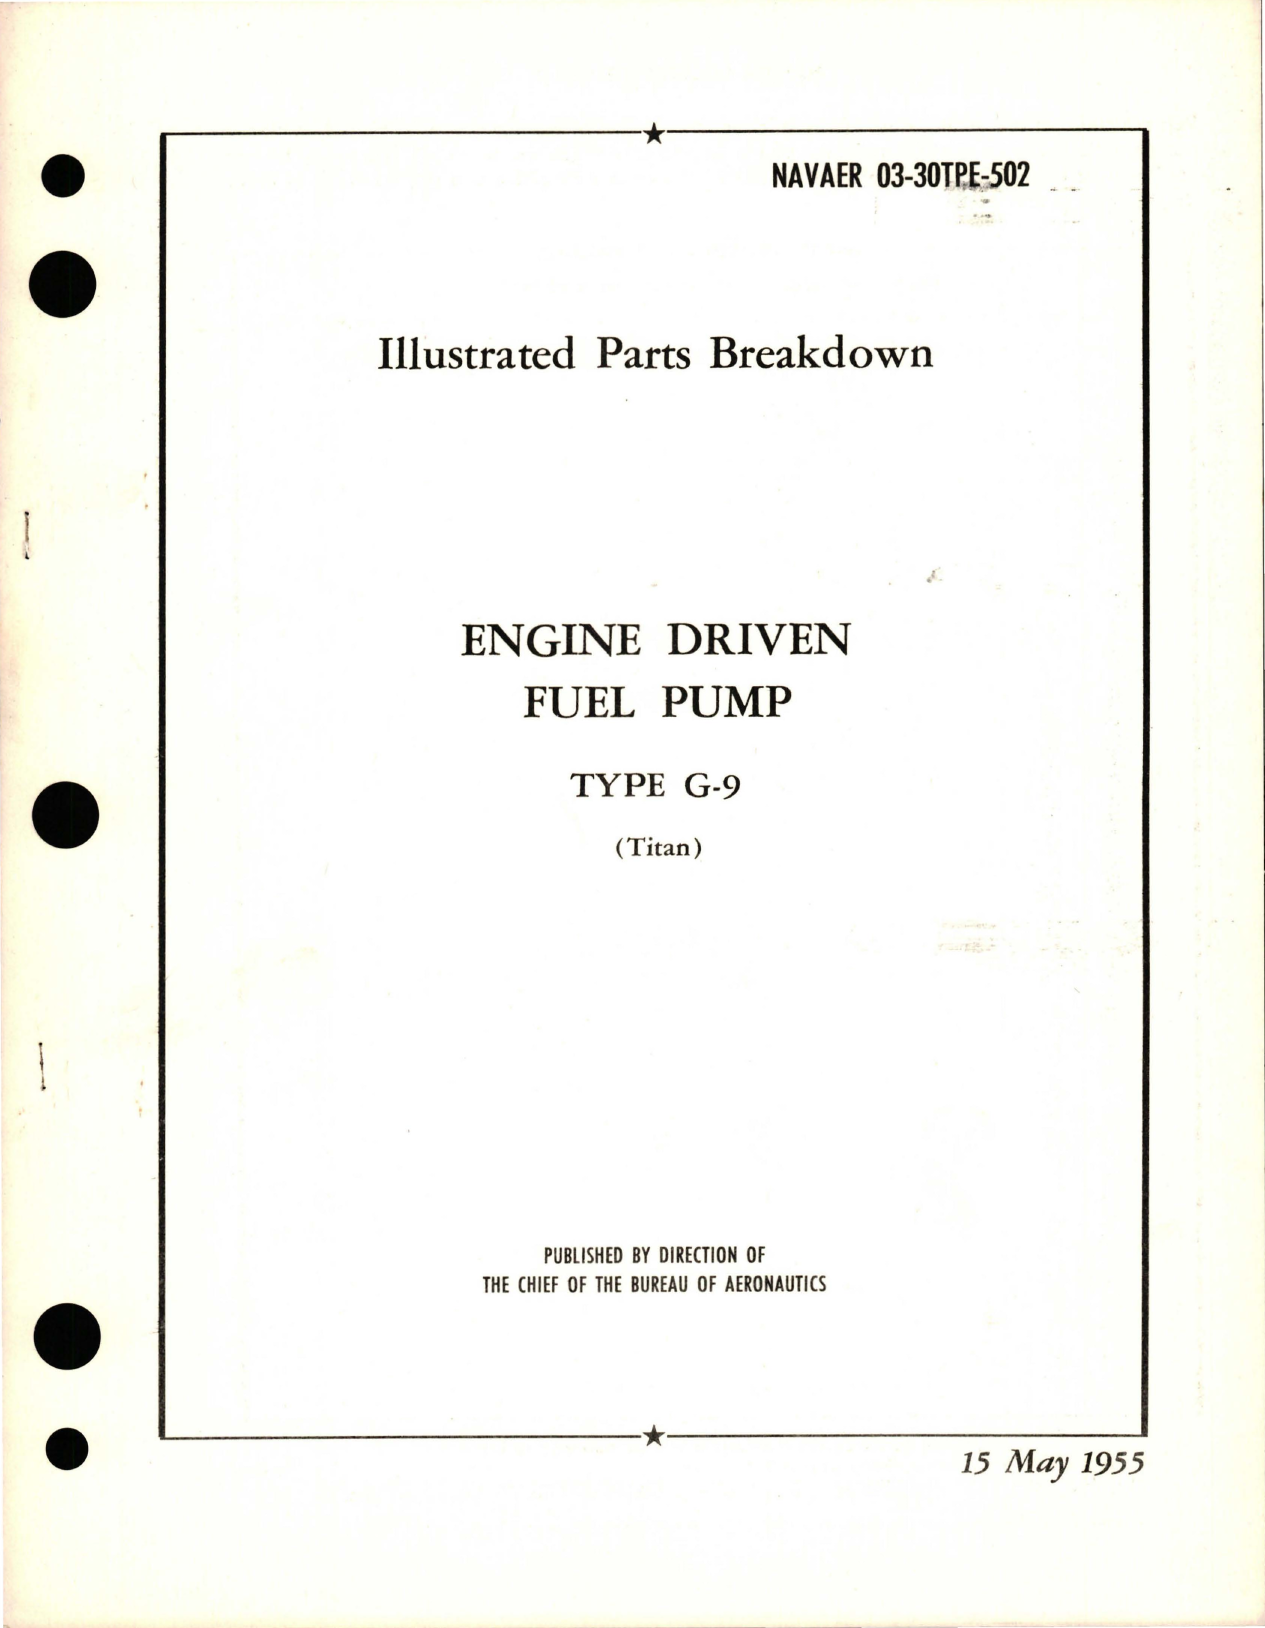 Sample page 1 from AirCorps Library document: Illustrated Parts Breakdown for Engine Driven Fuel Pump - Type G-9 